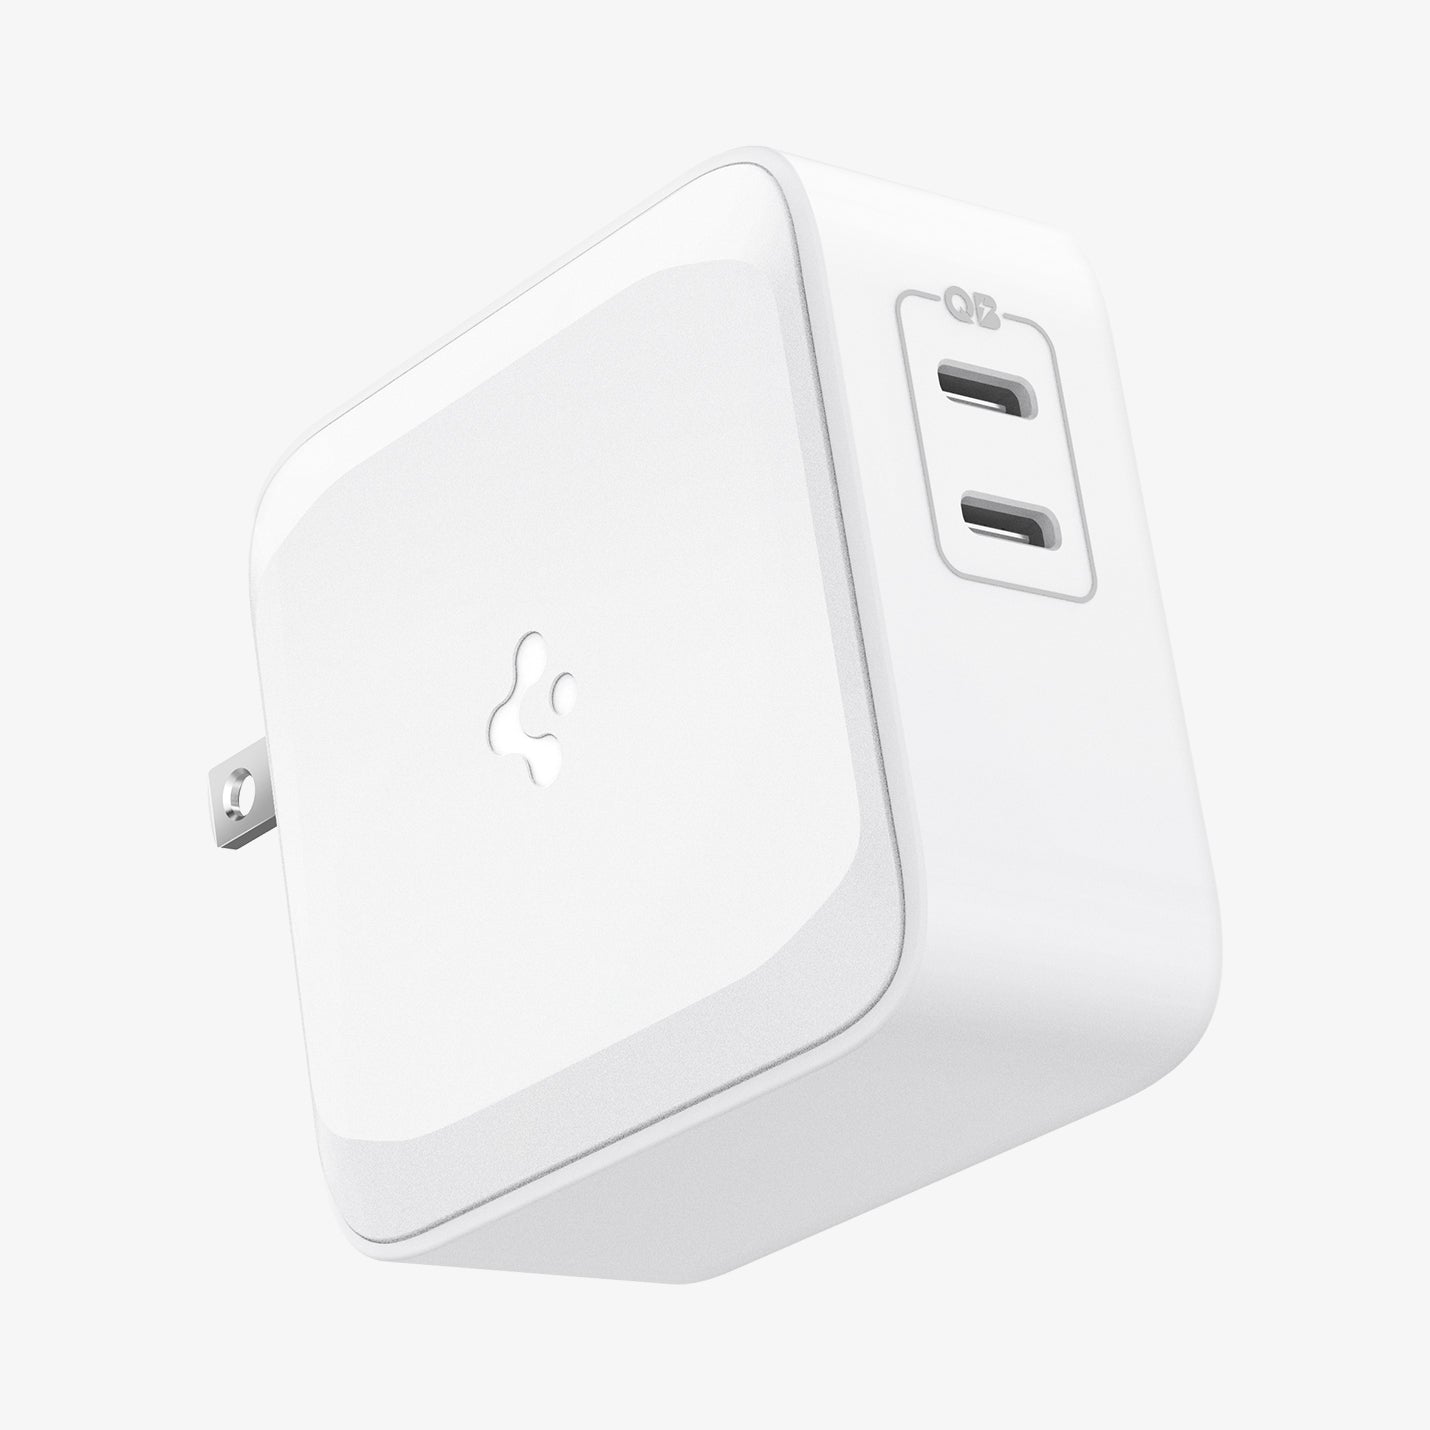 ACH02081 - ArcStation™ Pro GaN 70W Dual Port Wall Charger PE2007 in White showing the sides, top with 2 usb c-type charging ports